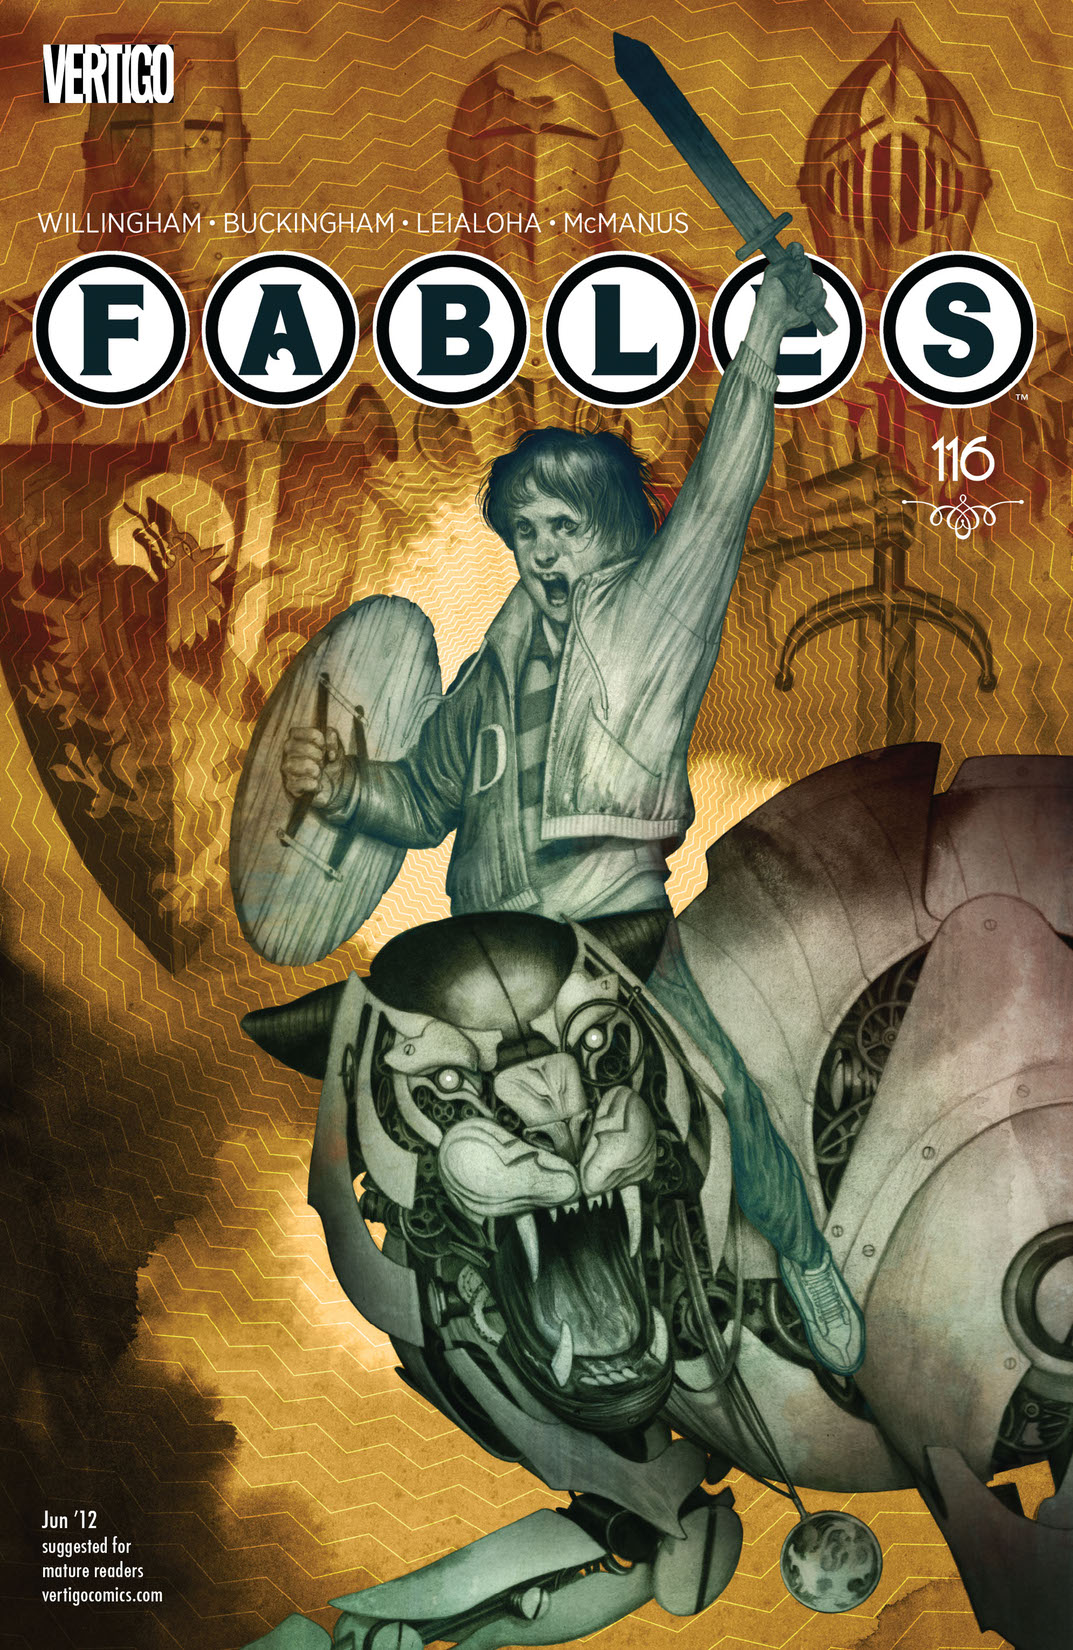 Fables #116 preview images